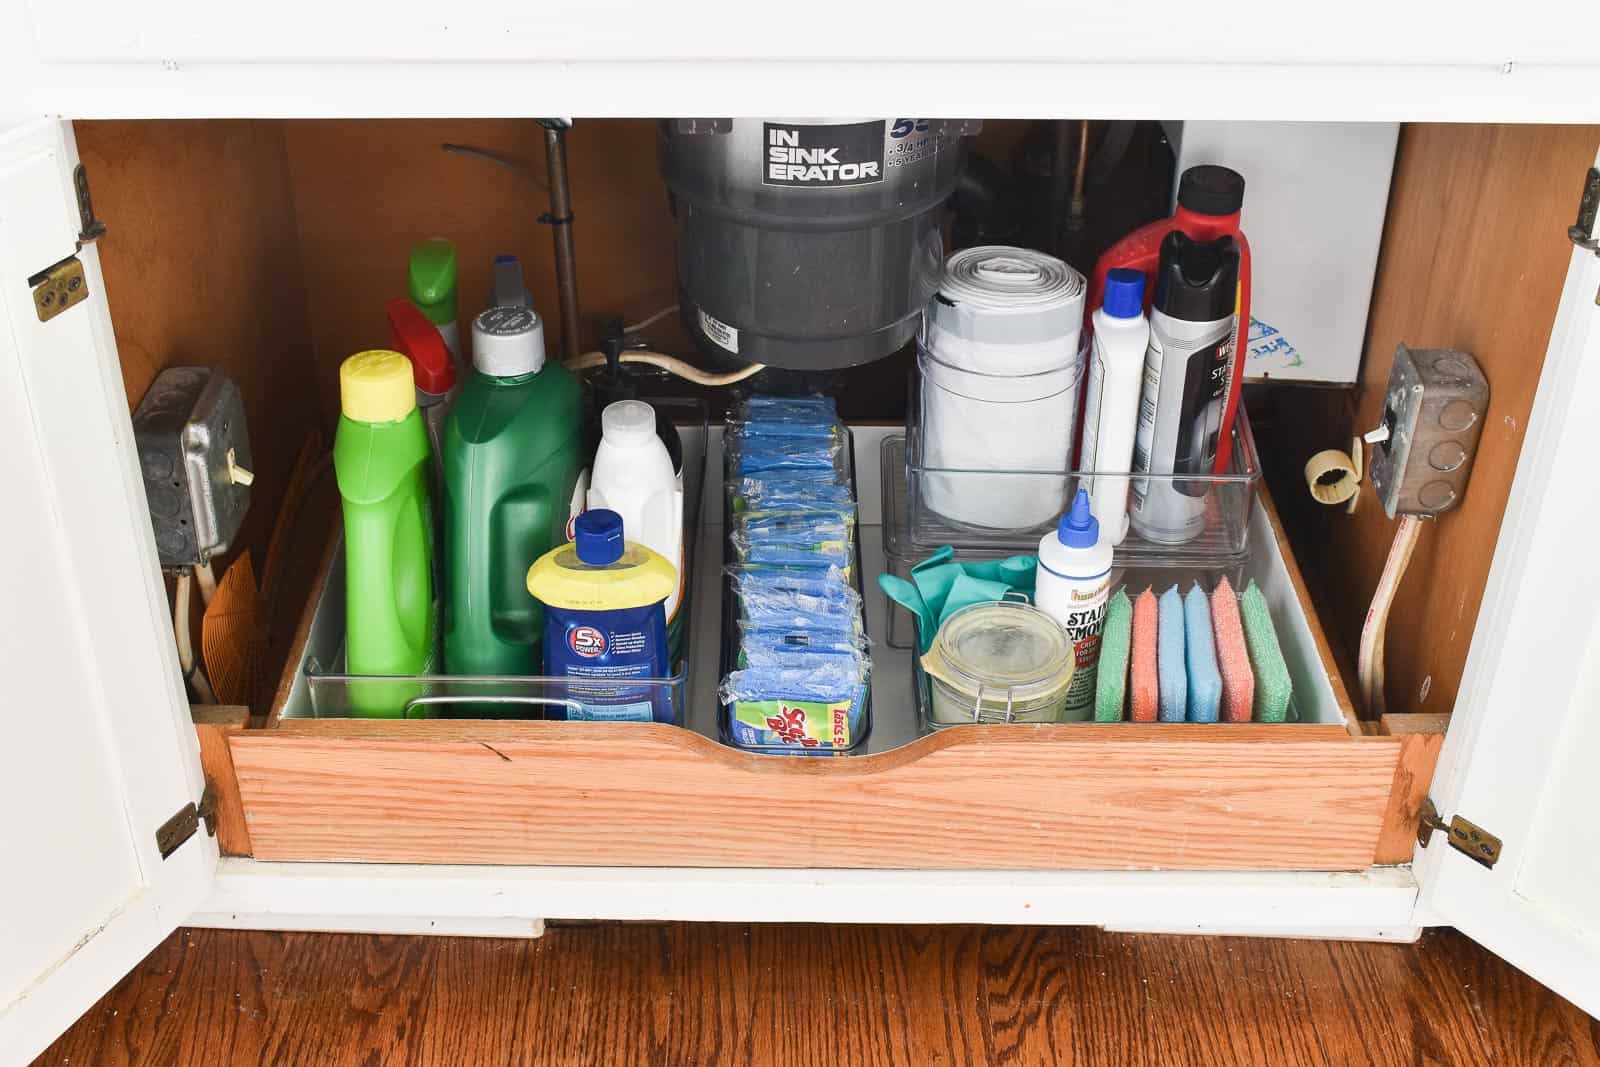 clutter under the sink after